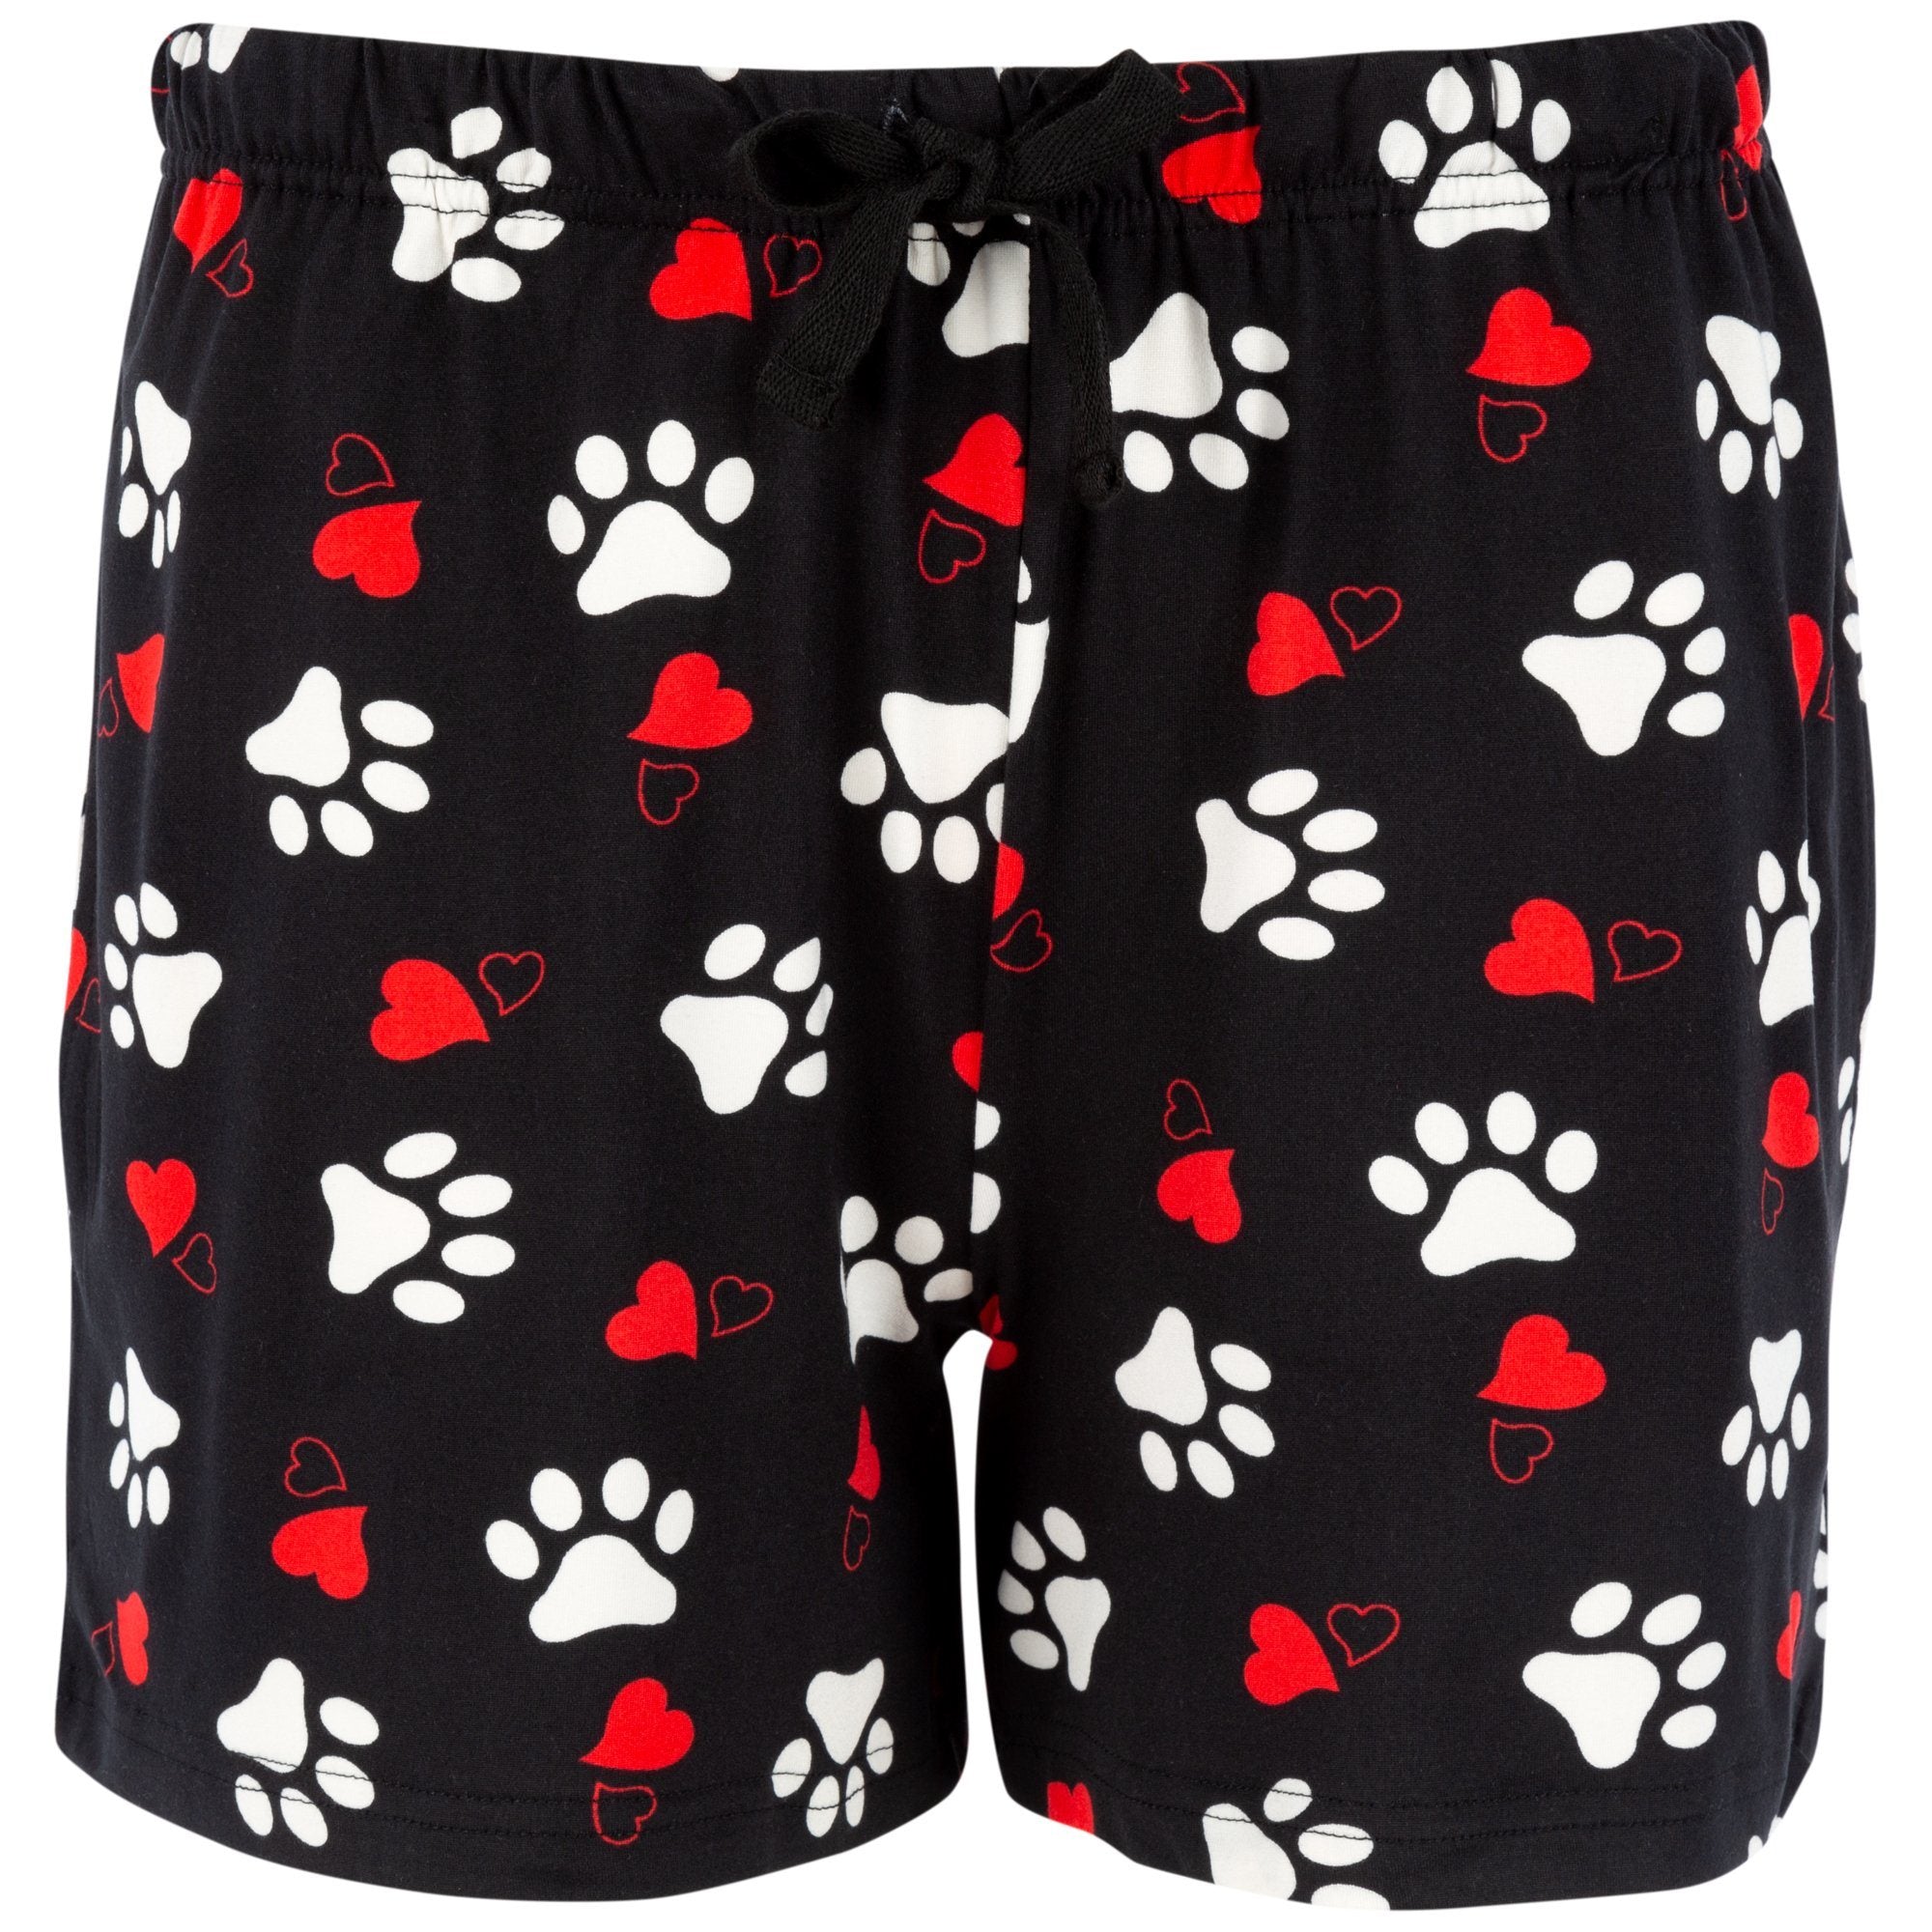 Hearts & Paws Soft Touch Pajamas - Shorts - S